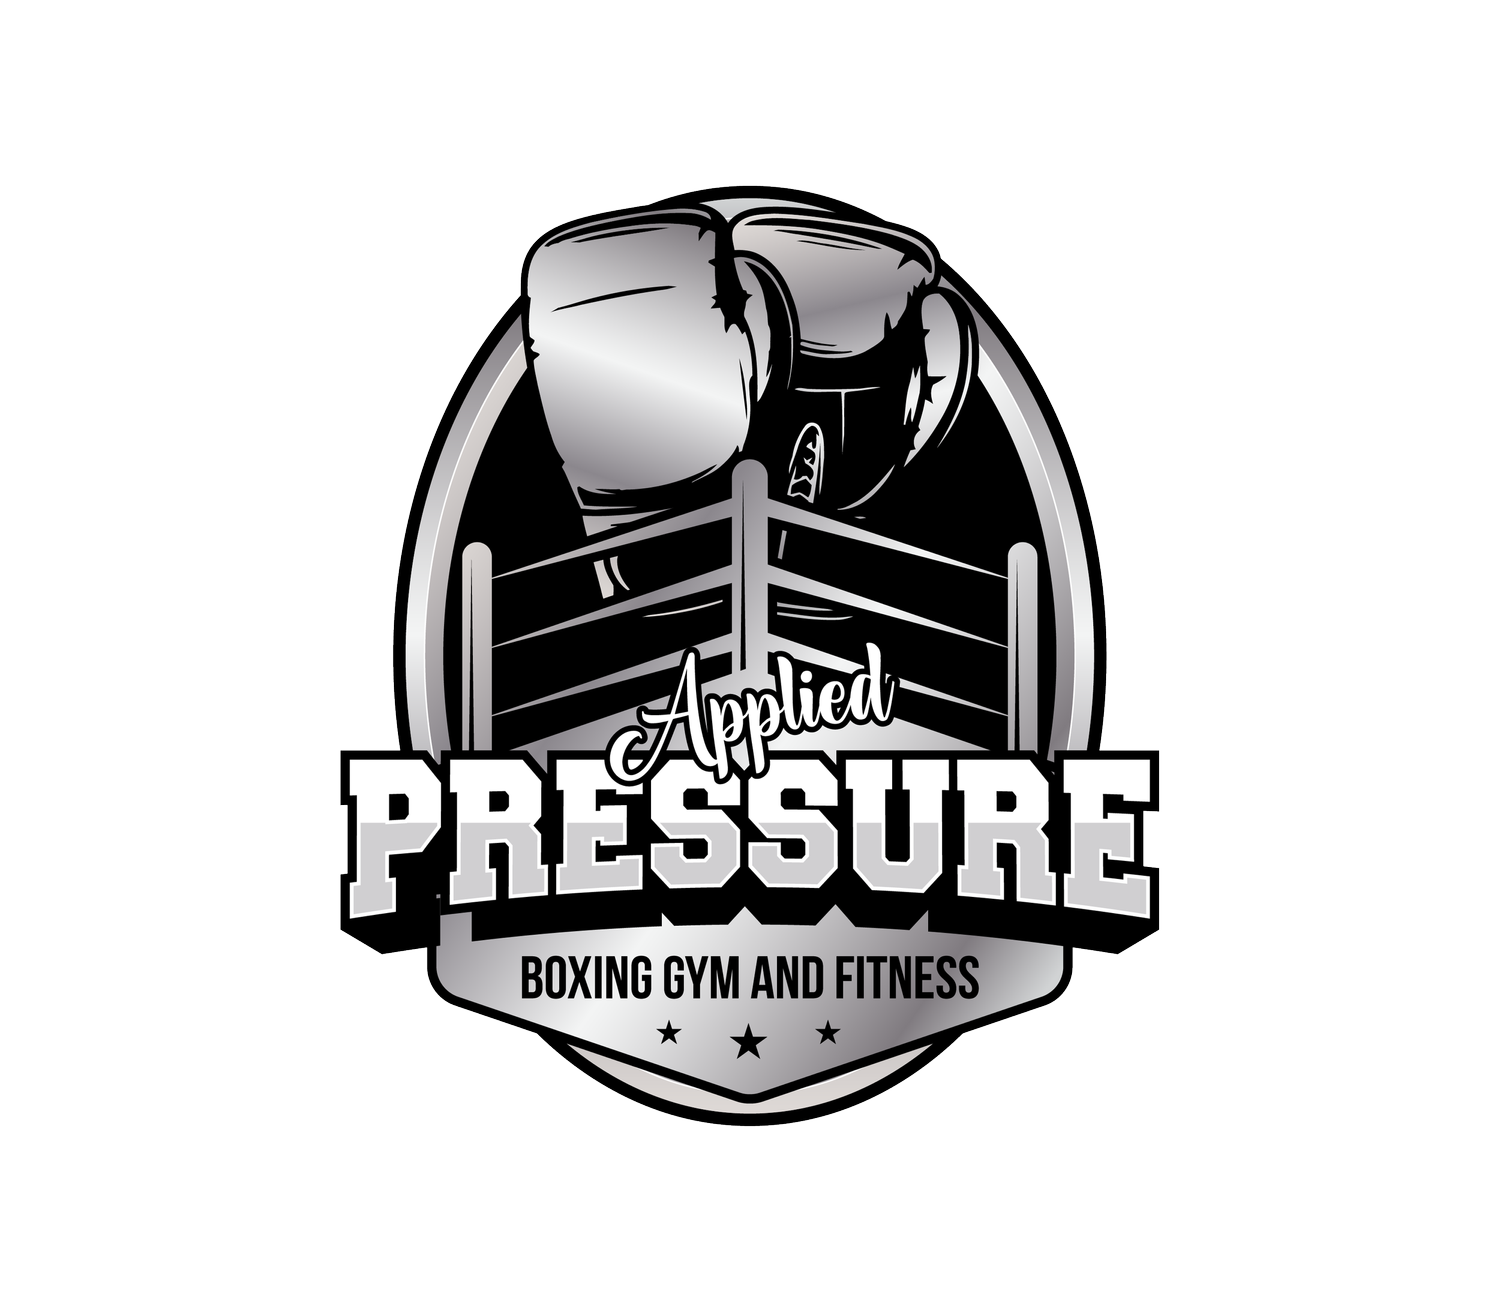 Applied Pressure Boxing Gym and Fitness